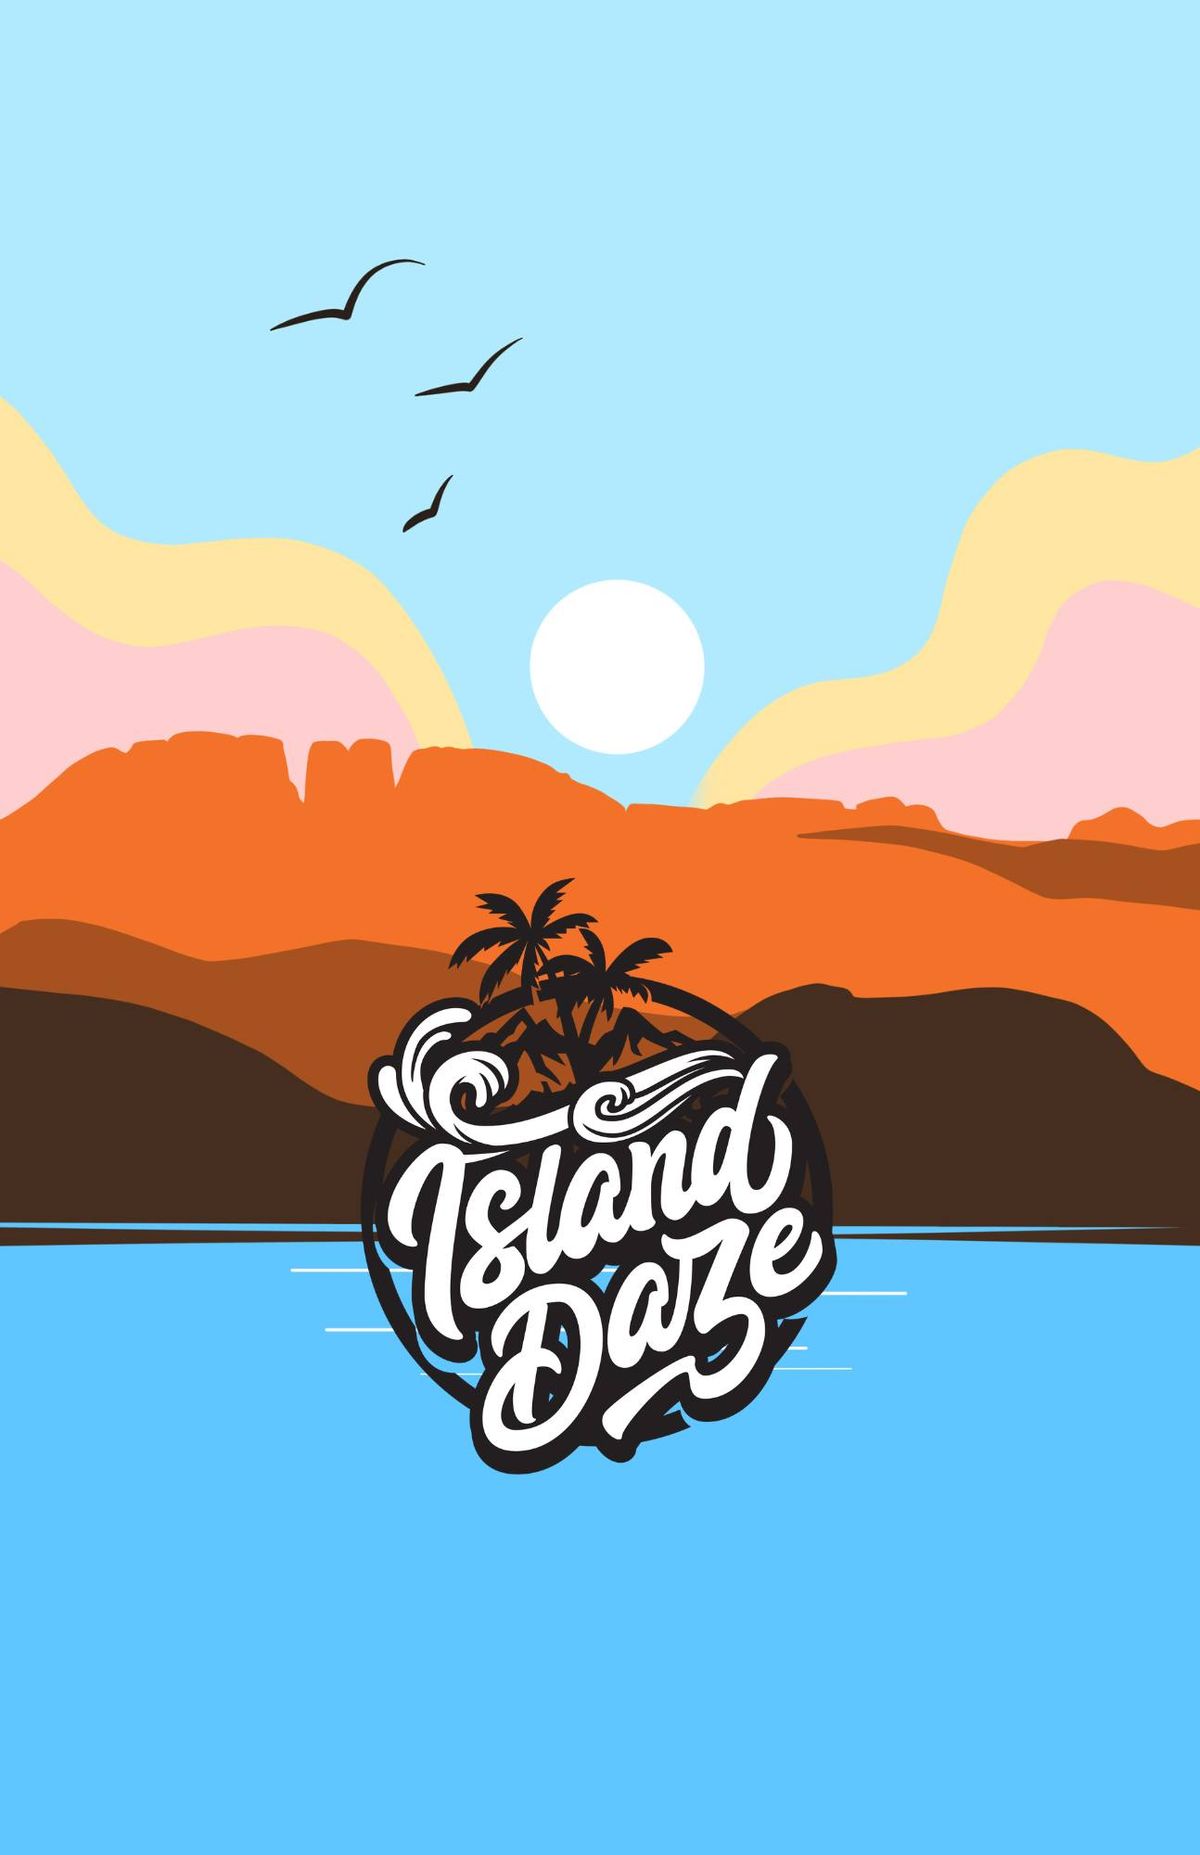 Island Daze - @Purpose Brewing - 12pm-9pm - Tiki-inspired cocktail beers